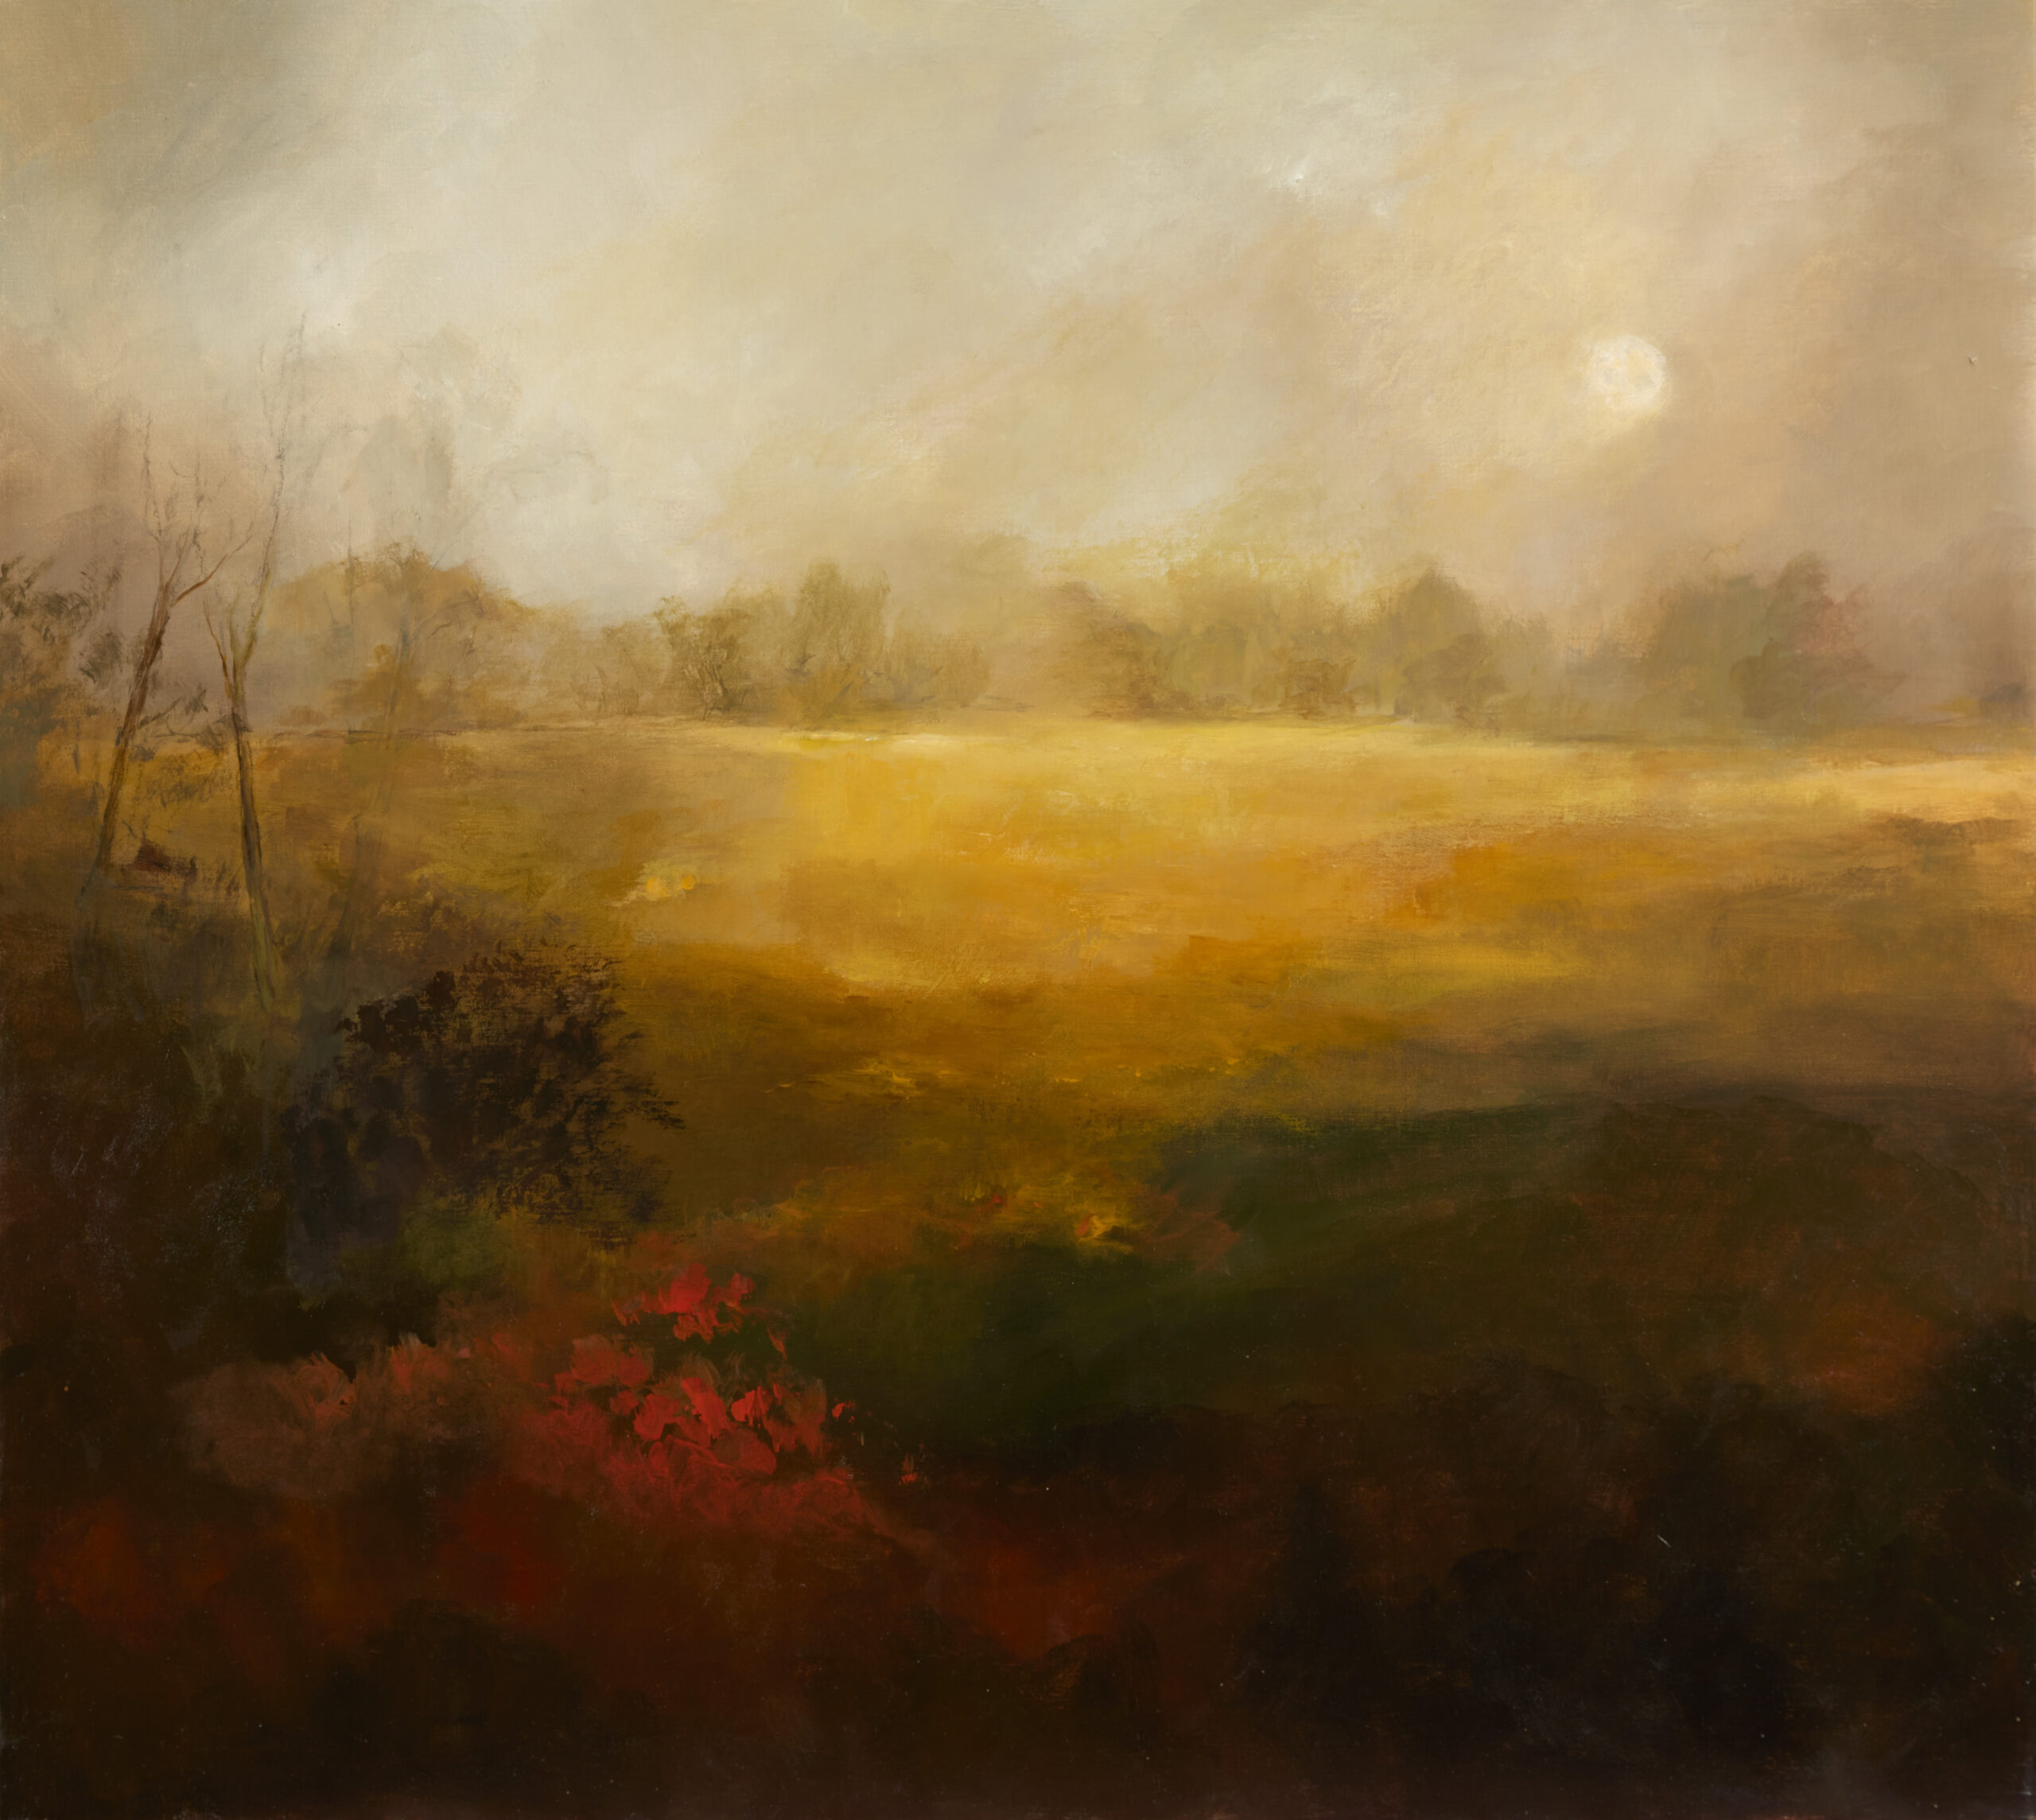 Fields of County Offaly, 113x114cm